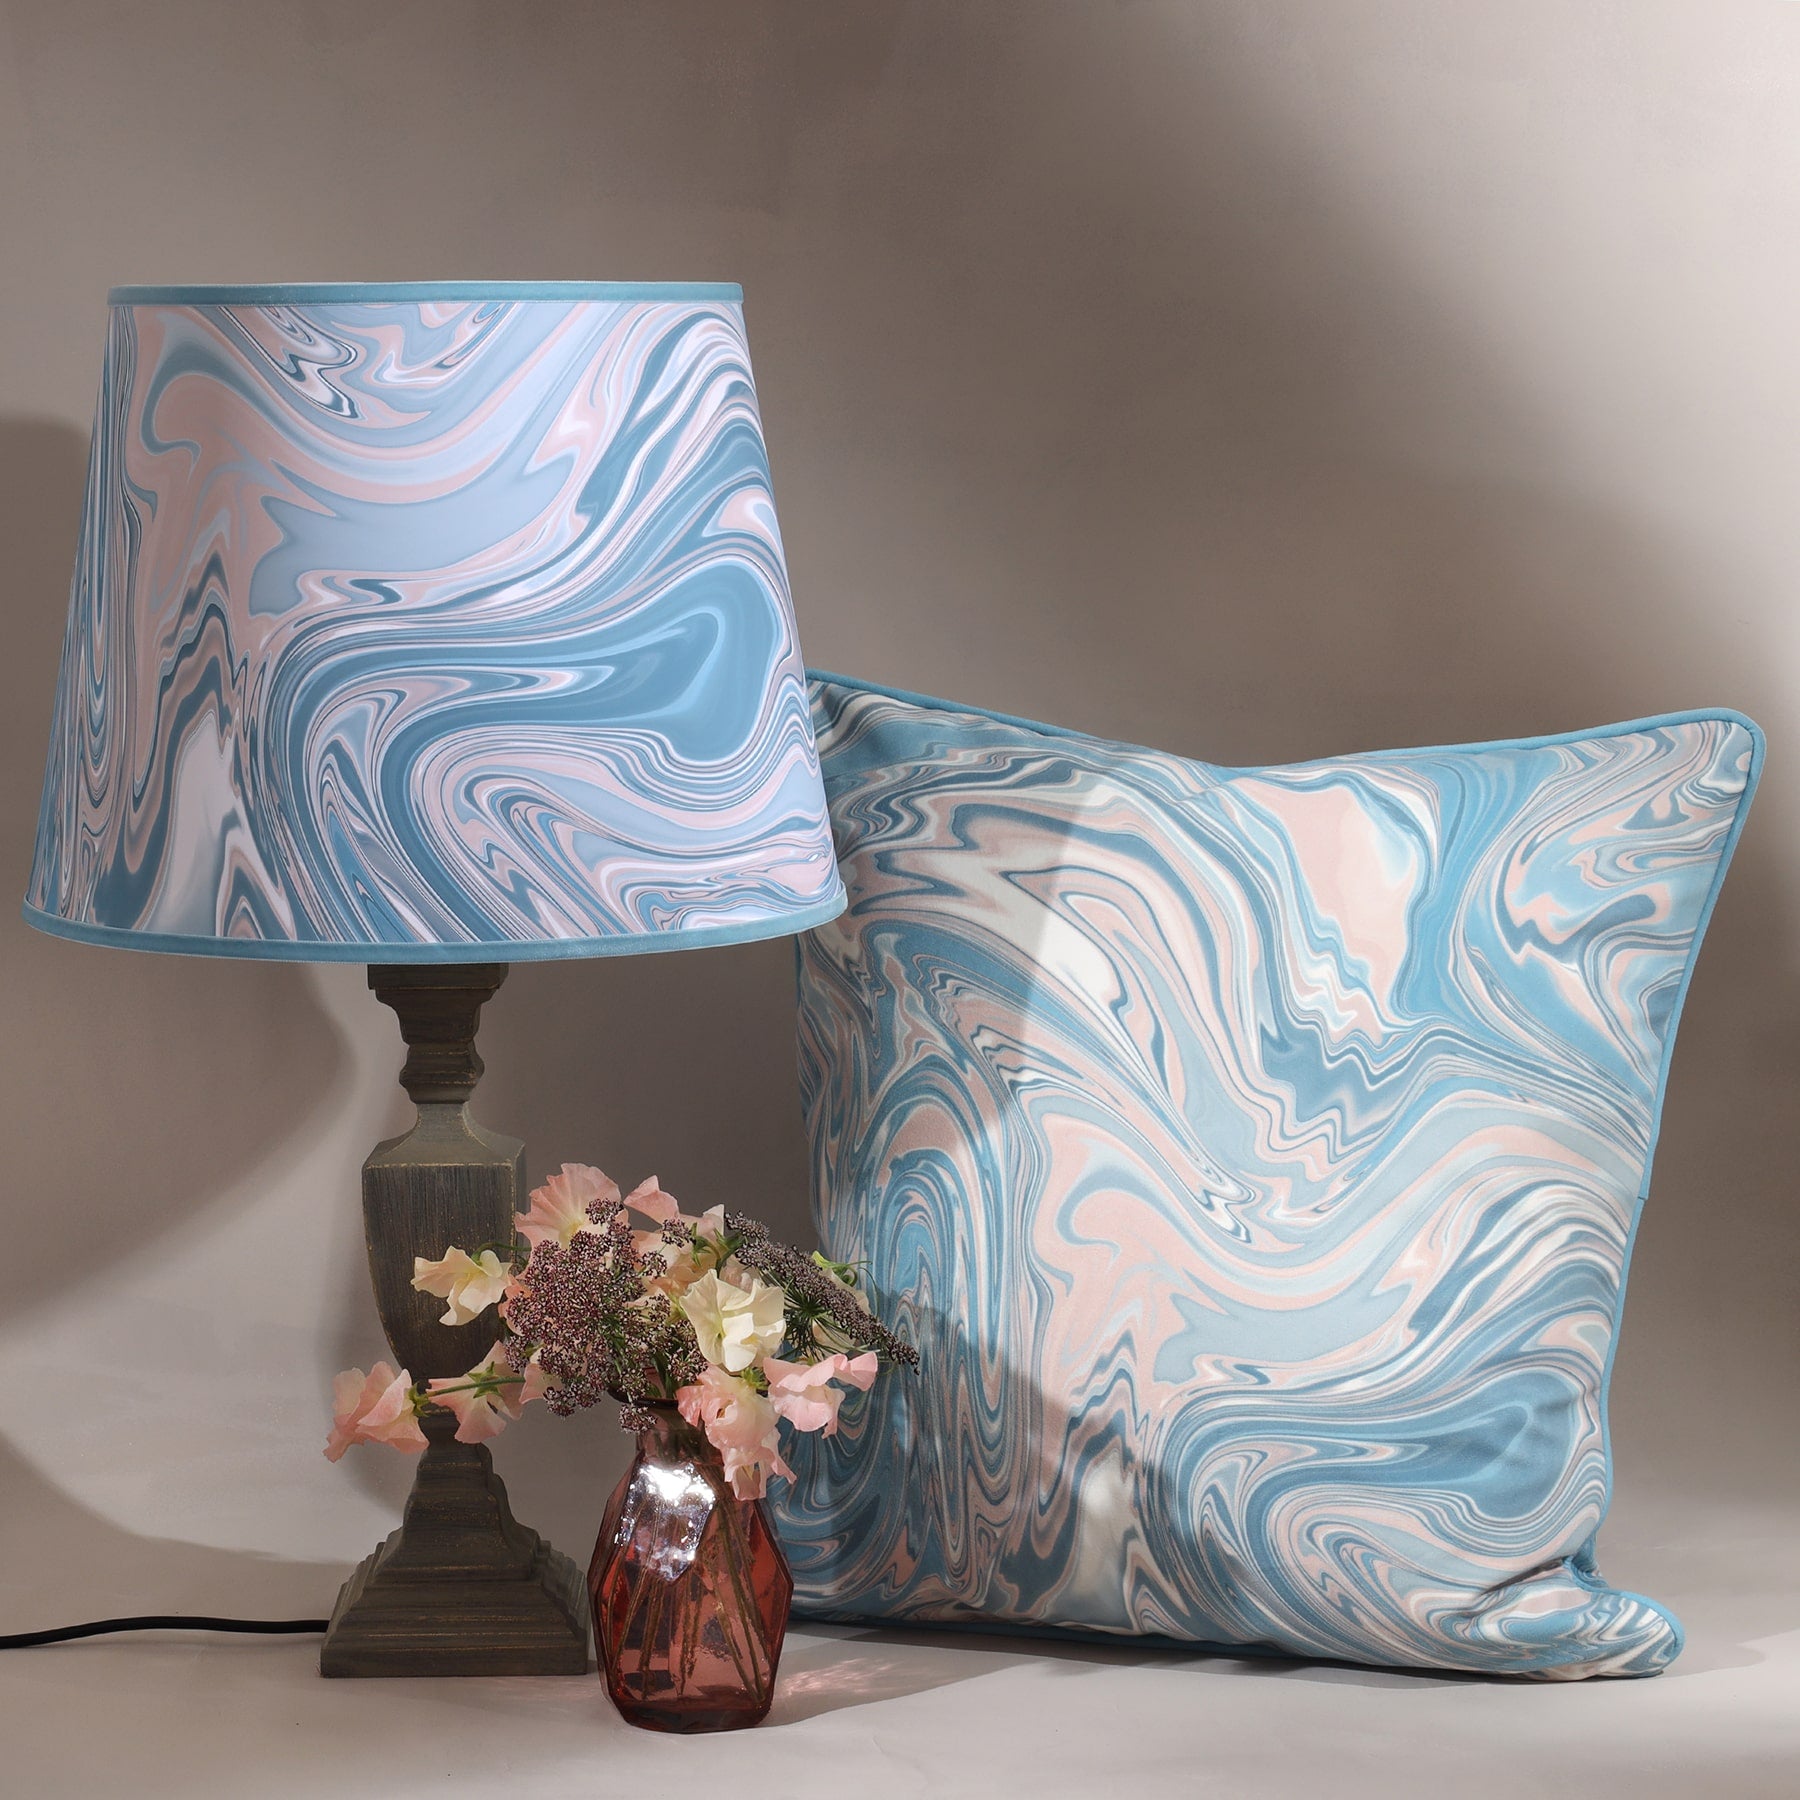 Ripple,marble design in beige/blues/greys on a lampshade on a wooden lampbase.Next to the base is a small glass vase with hydrandeas in,next to it is a matching cushion